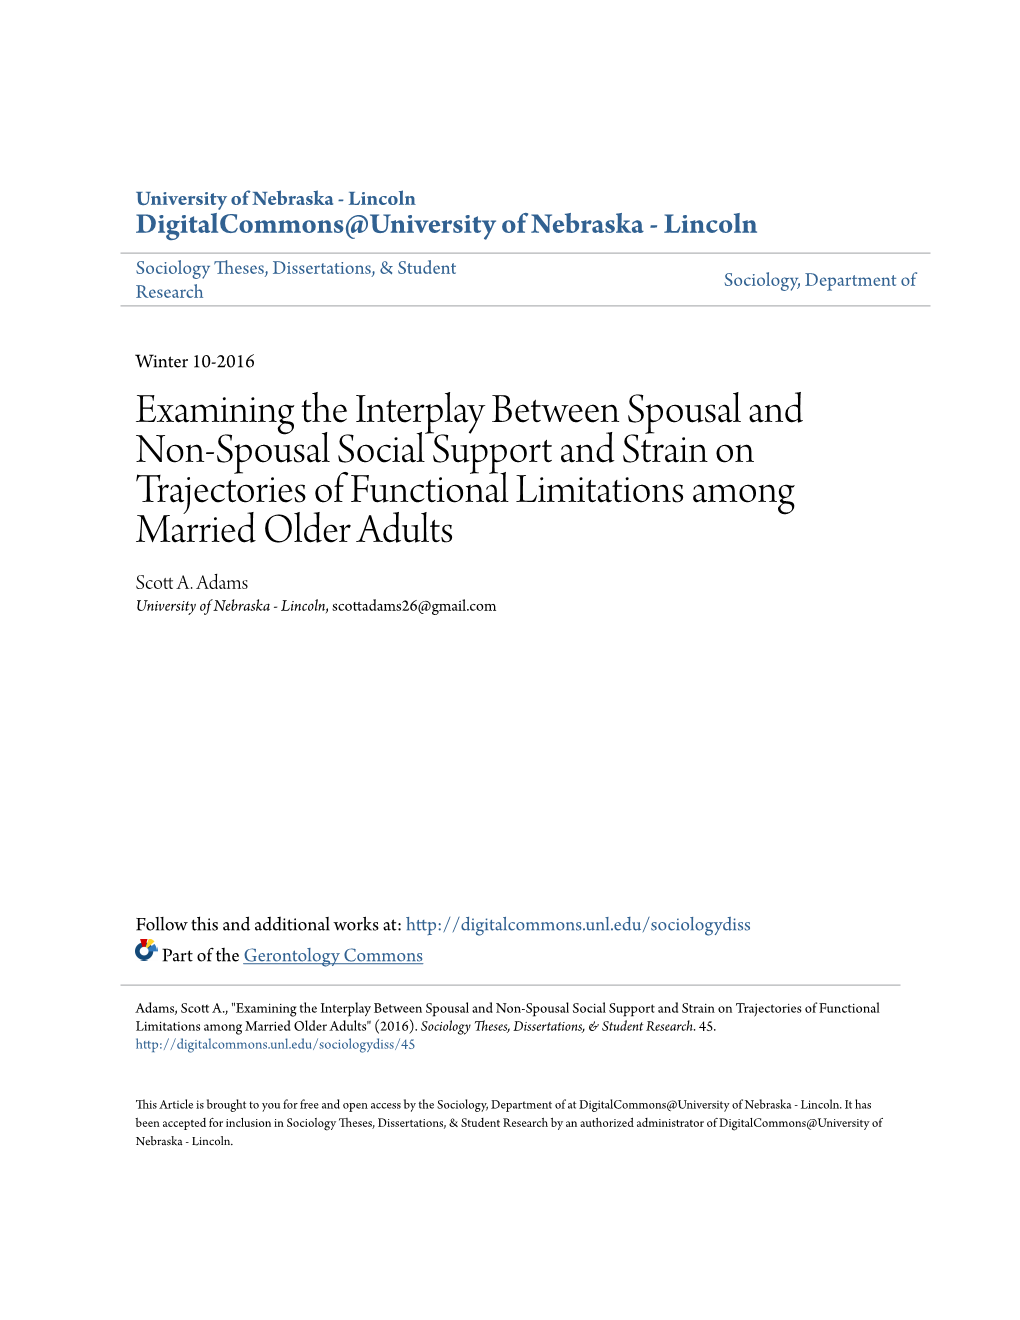 Examining the Interplay Between Spousal and Non-Spousal Social Support and Strain on Trajectories of Functional Limitations Among Married Older Adults Scott A